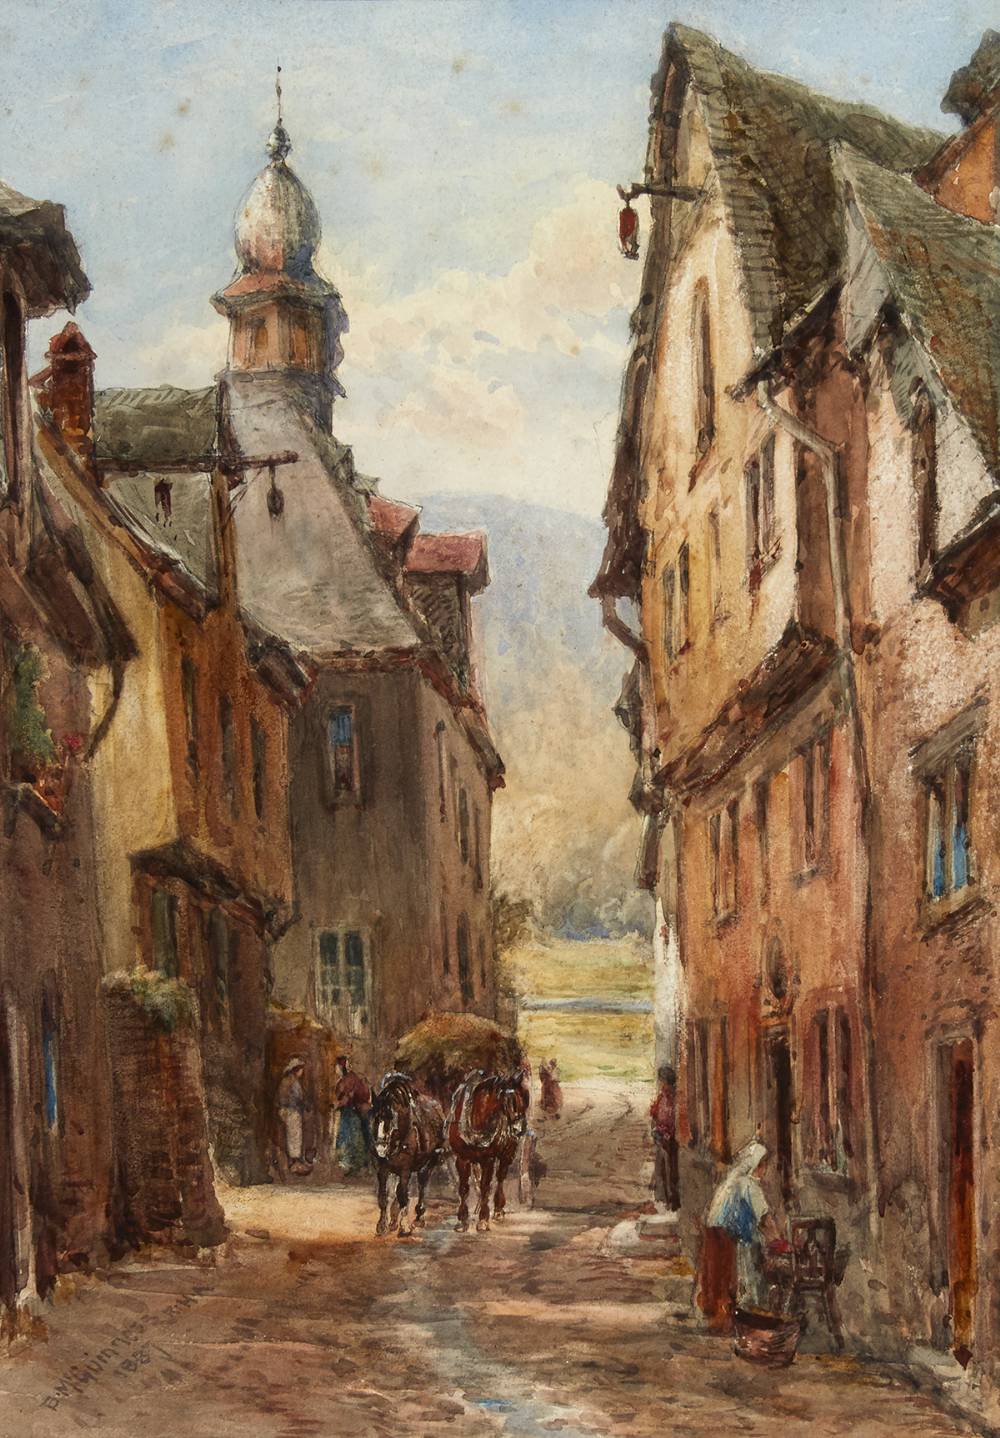 STREET SCENE WITH FIGURES, 1887 by William Bingham McGuinness RHA (1849-1928) at Whyte's Auctions